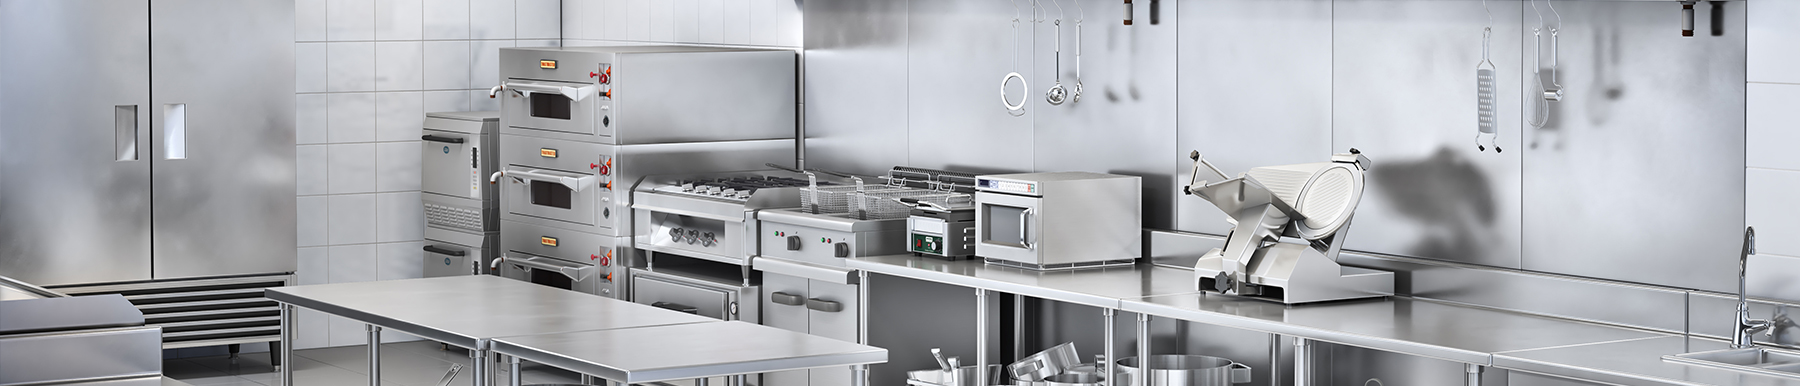 Catering Equipment Suppliers Near Southend-on-Sea | H2 Catering Equipment Catering Equipment